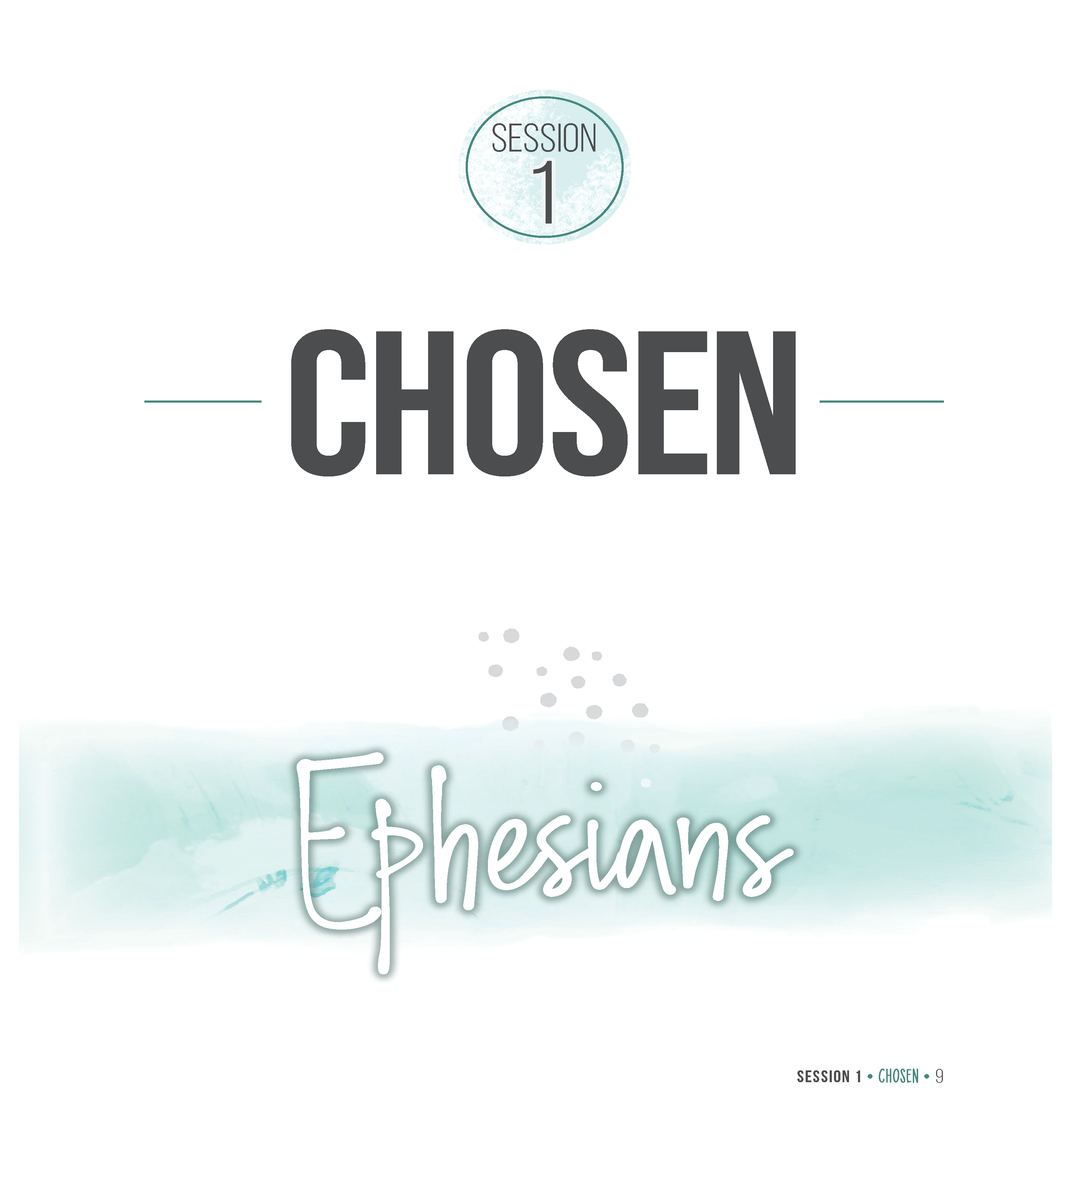 Ephesians Bible Study Guide plus Streaming Video